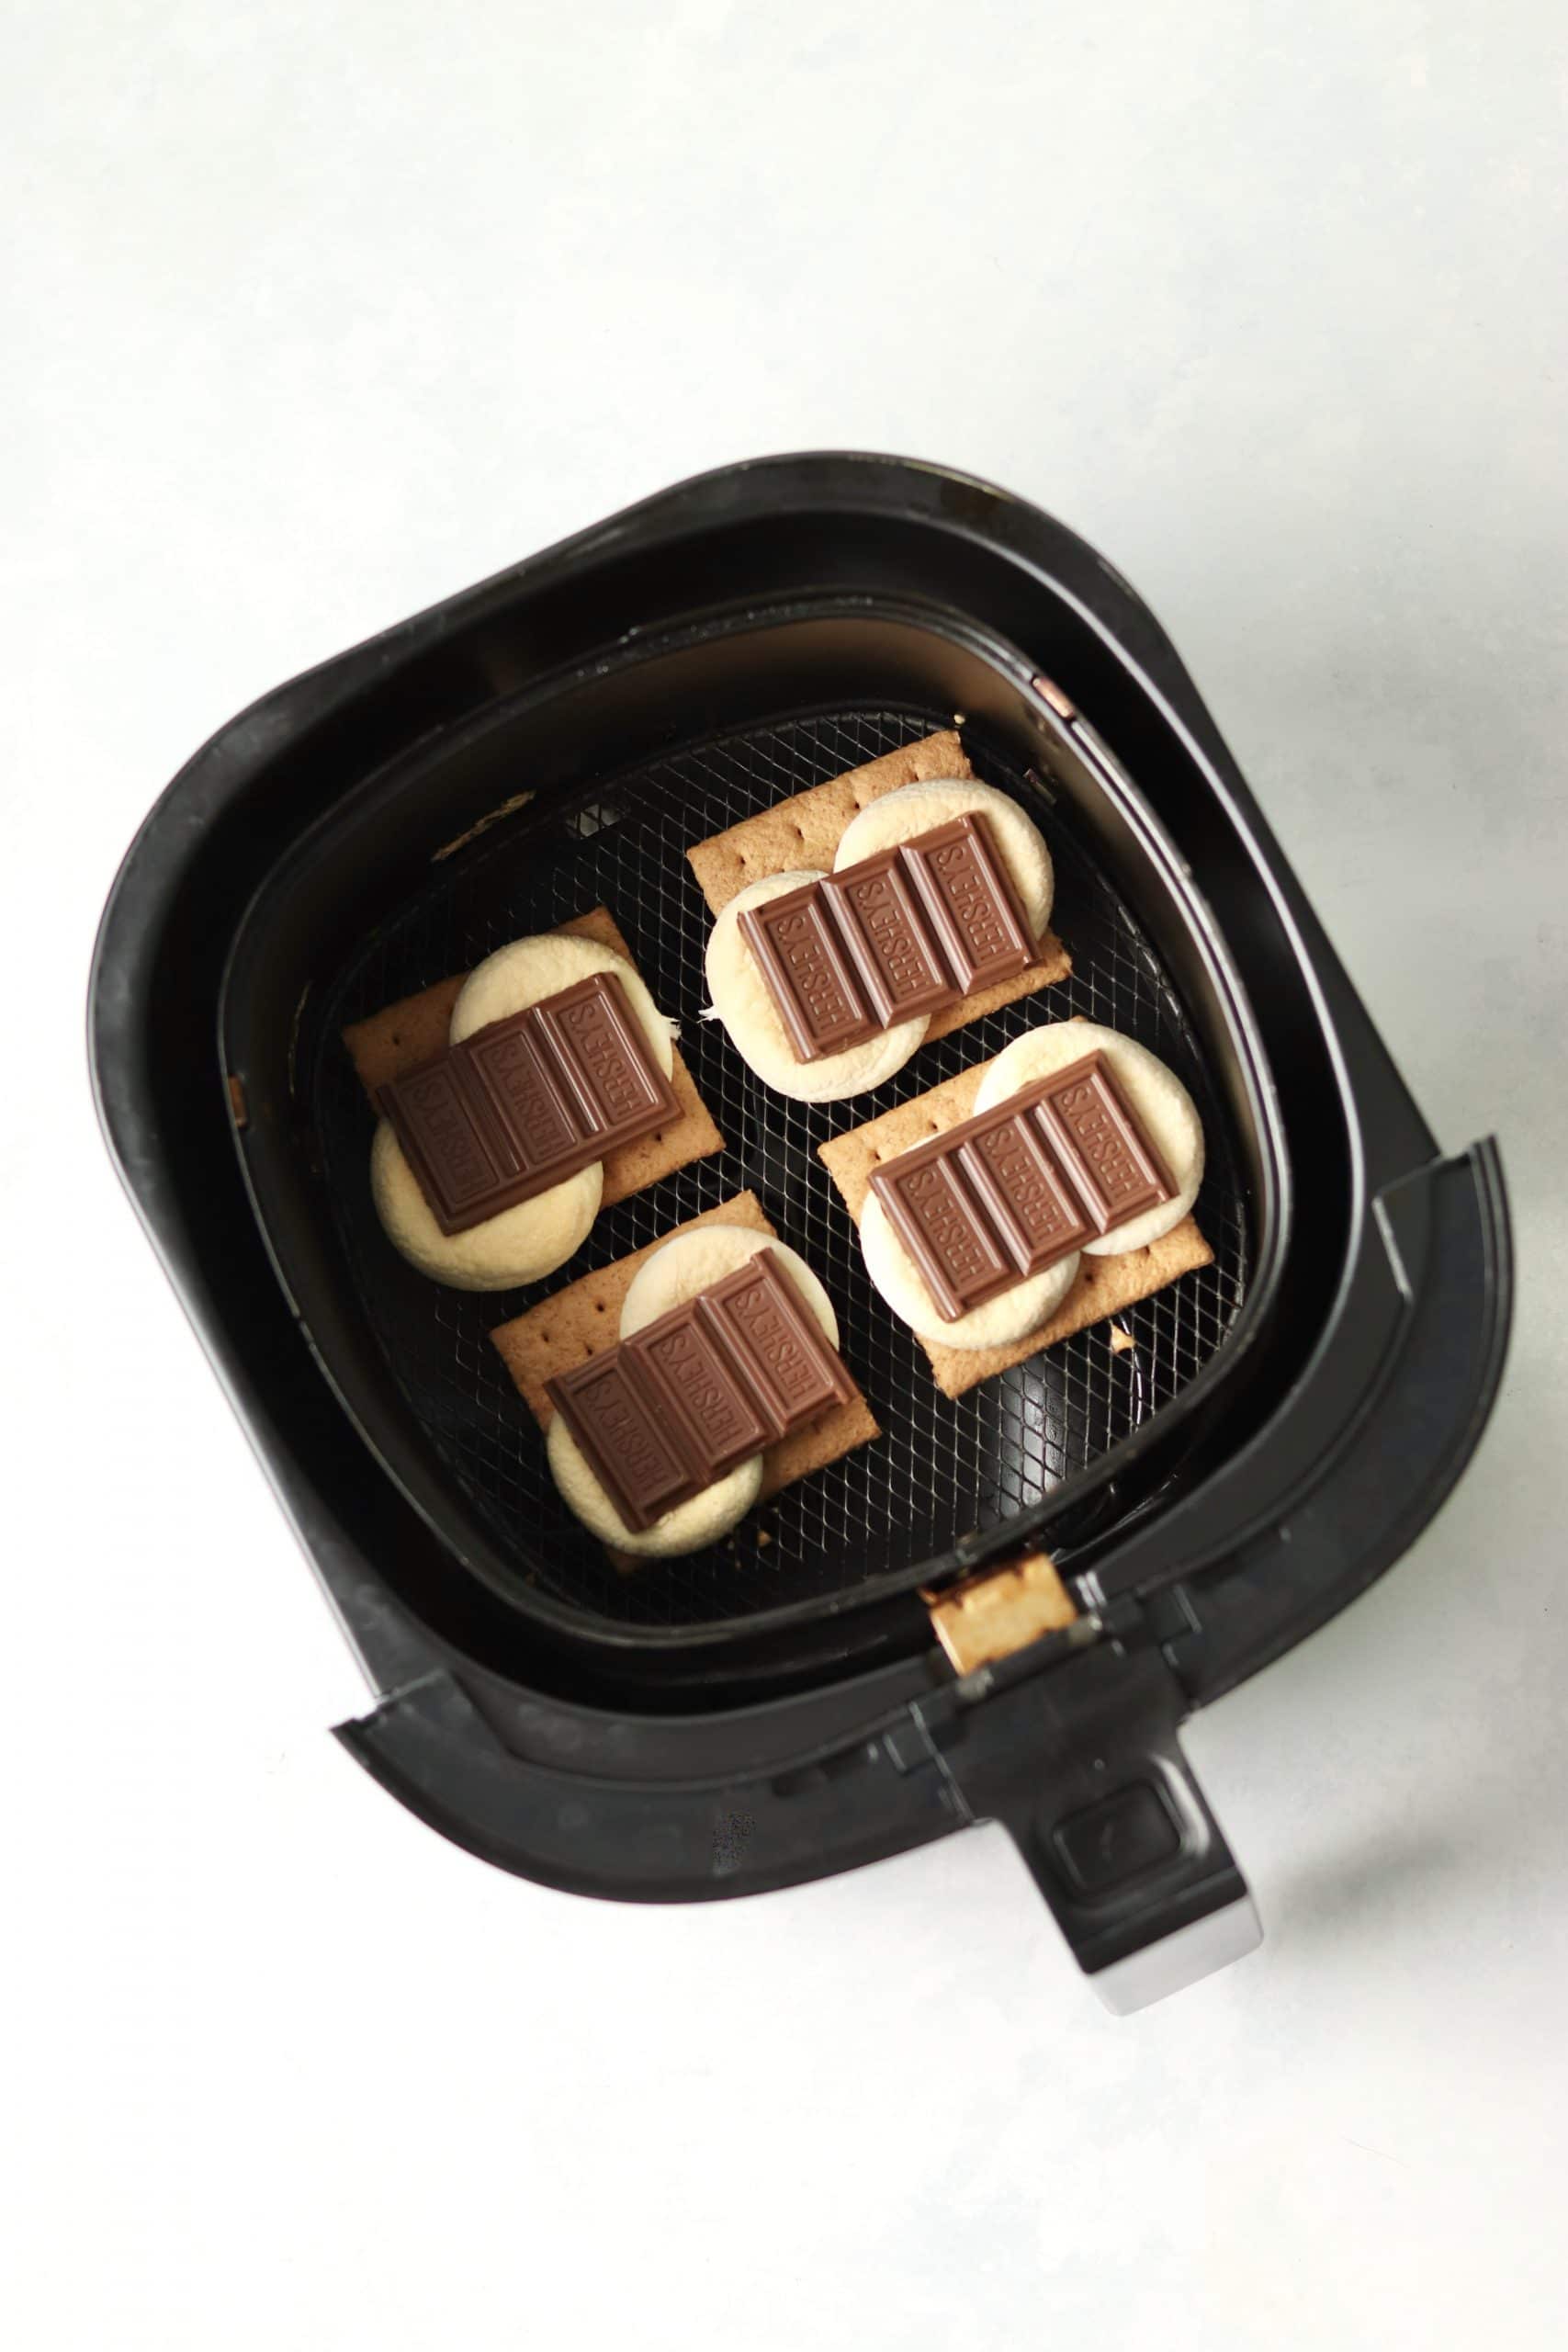 Hershey's chocolate on toasted marshmallows in air fryer basket.